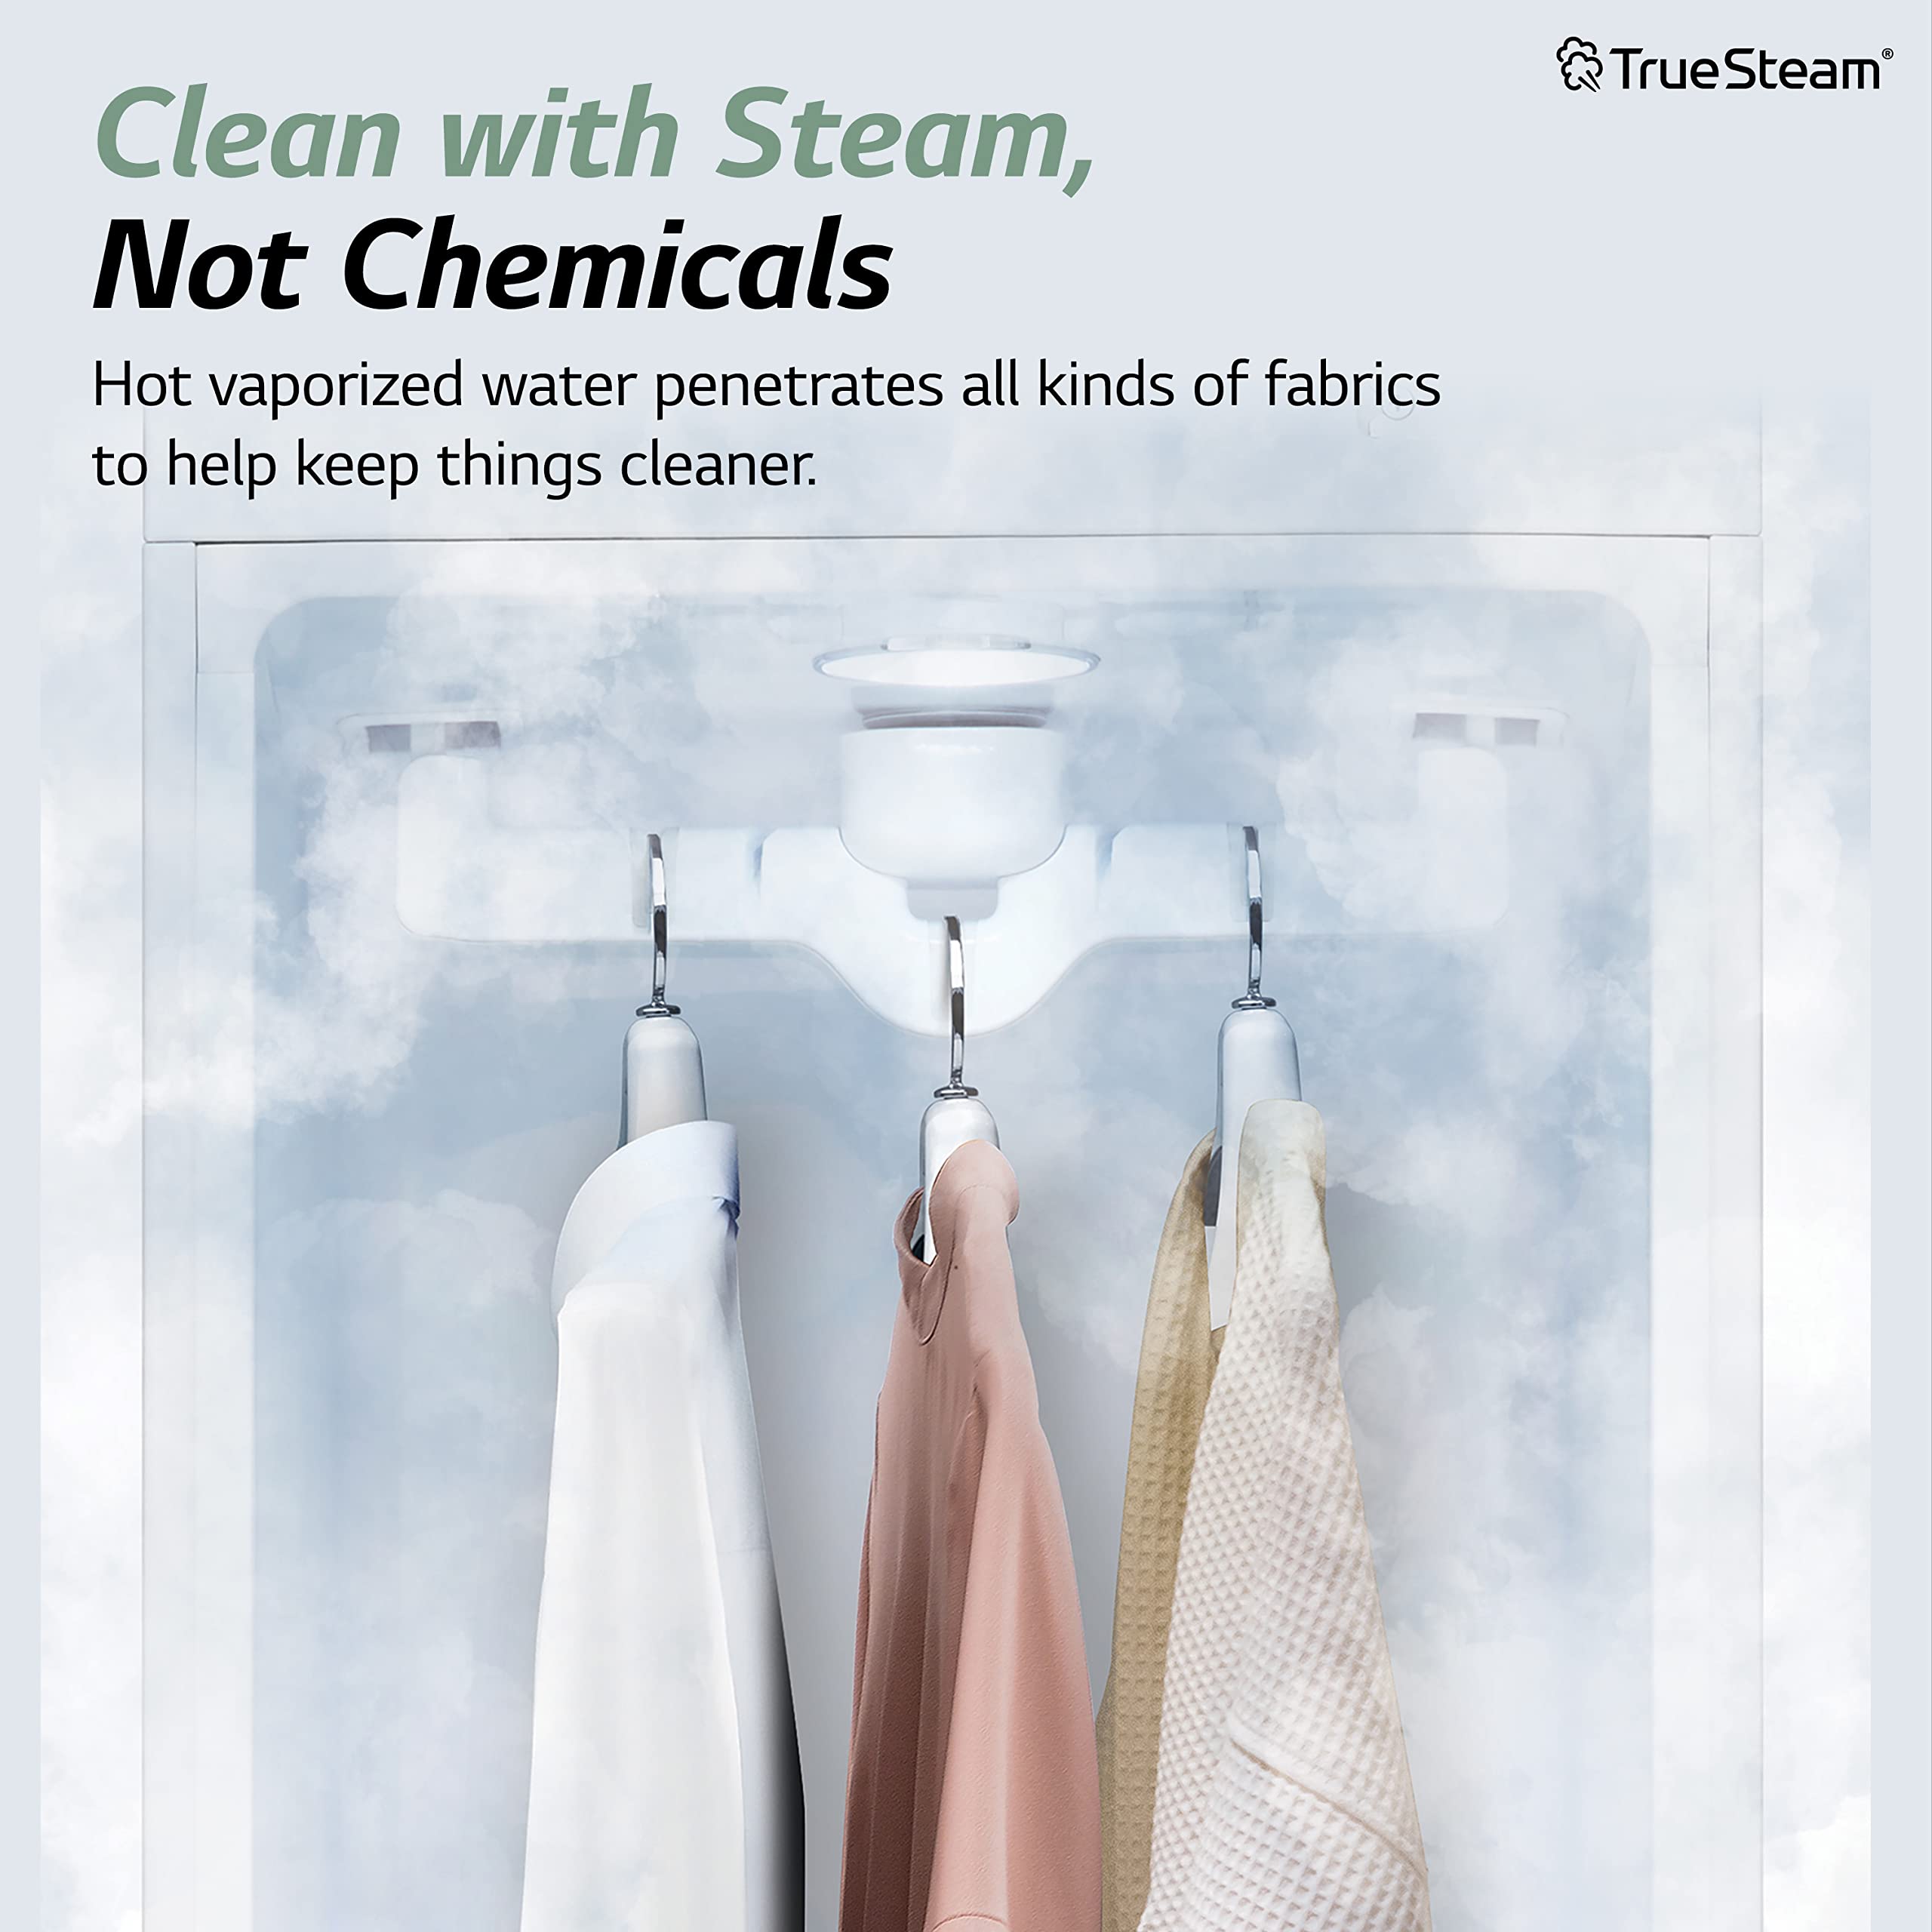 LG Styler Steam Closet | Clothes Steamer for Garments and Household Item Care